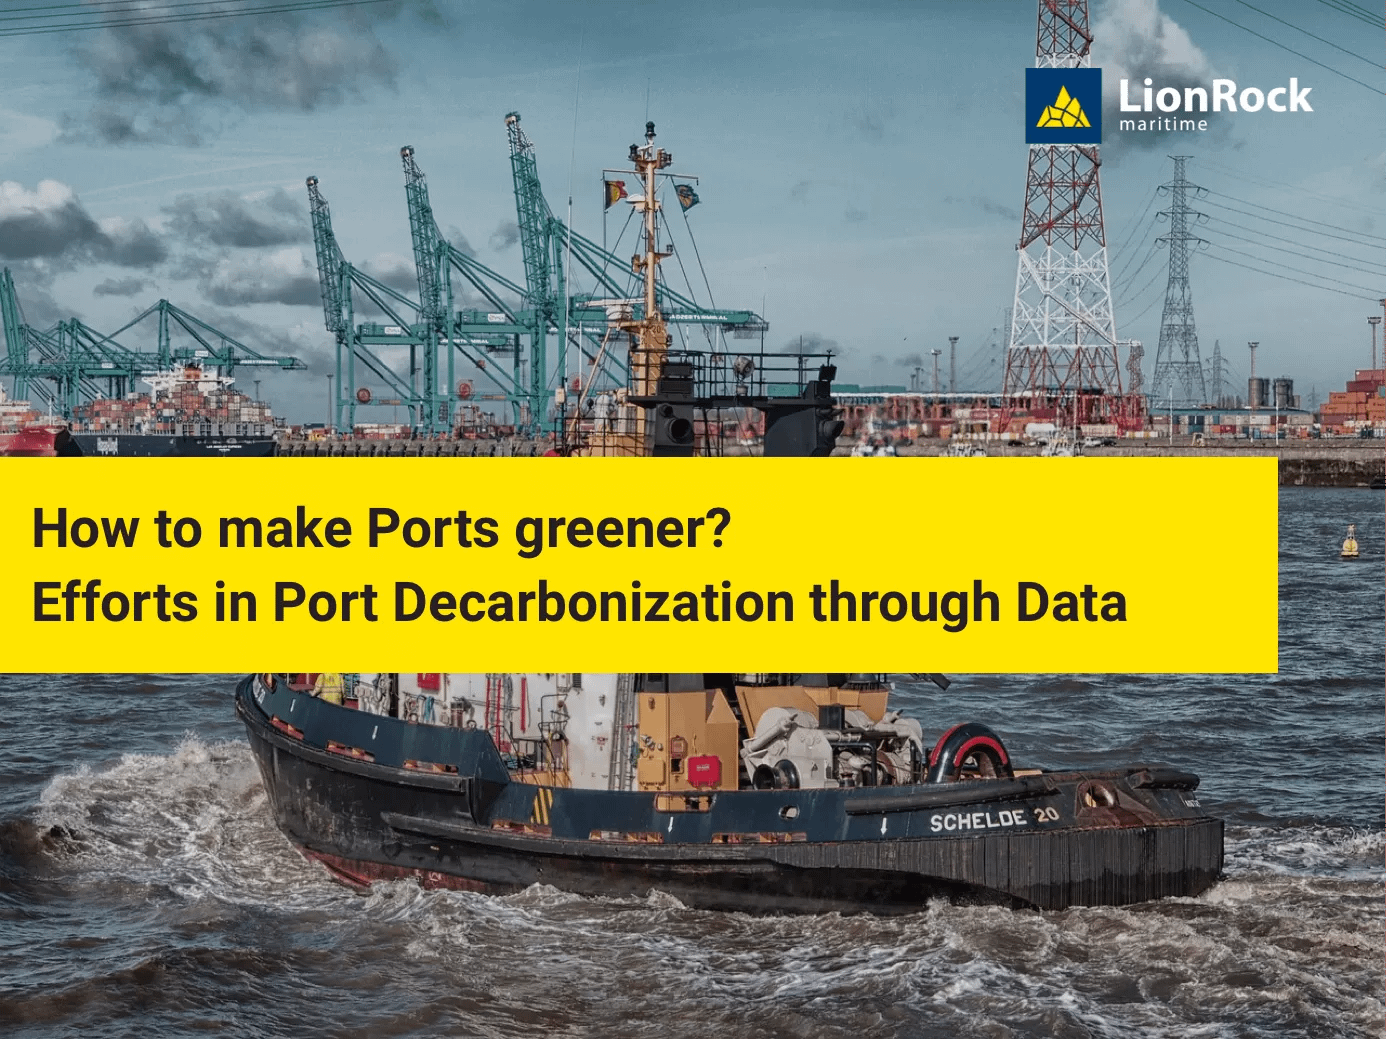 Green Ports: Decarbonizing Ports through Data and make Ports more efficient